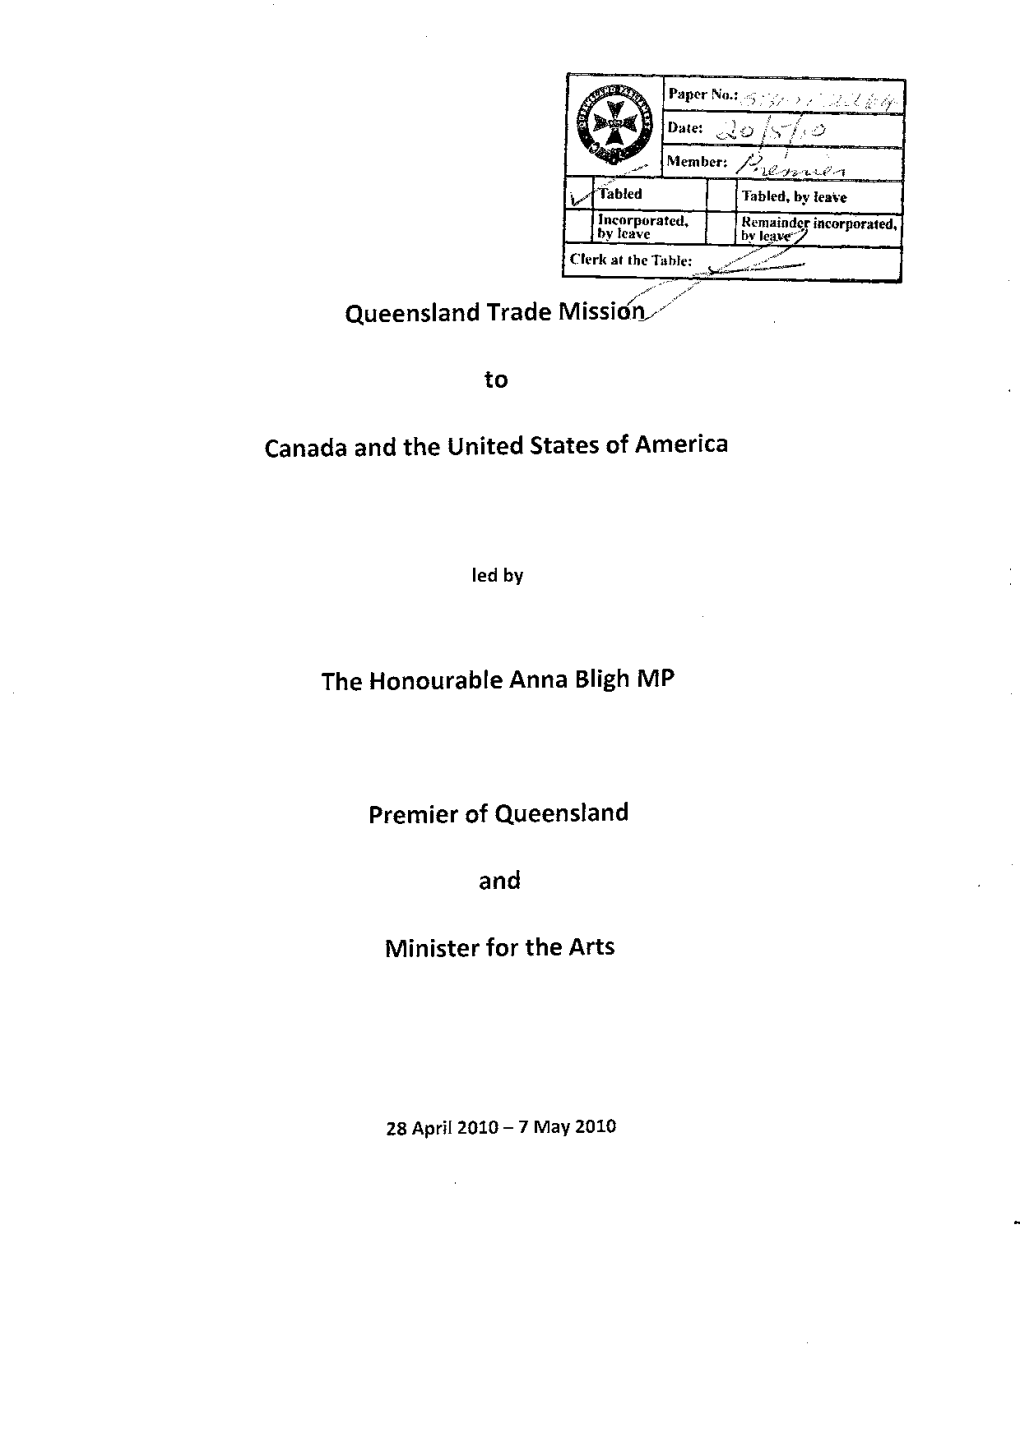 Queensland Trade Mission, to Canada and the United States Of